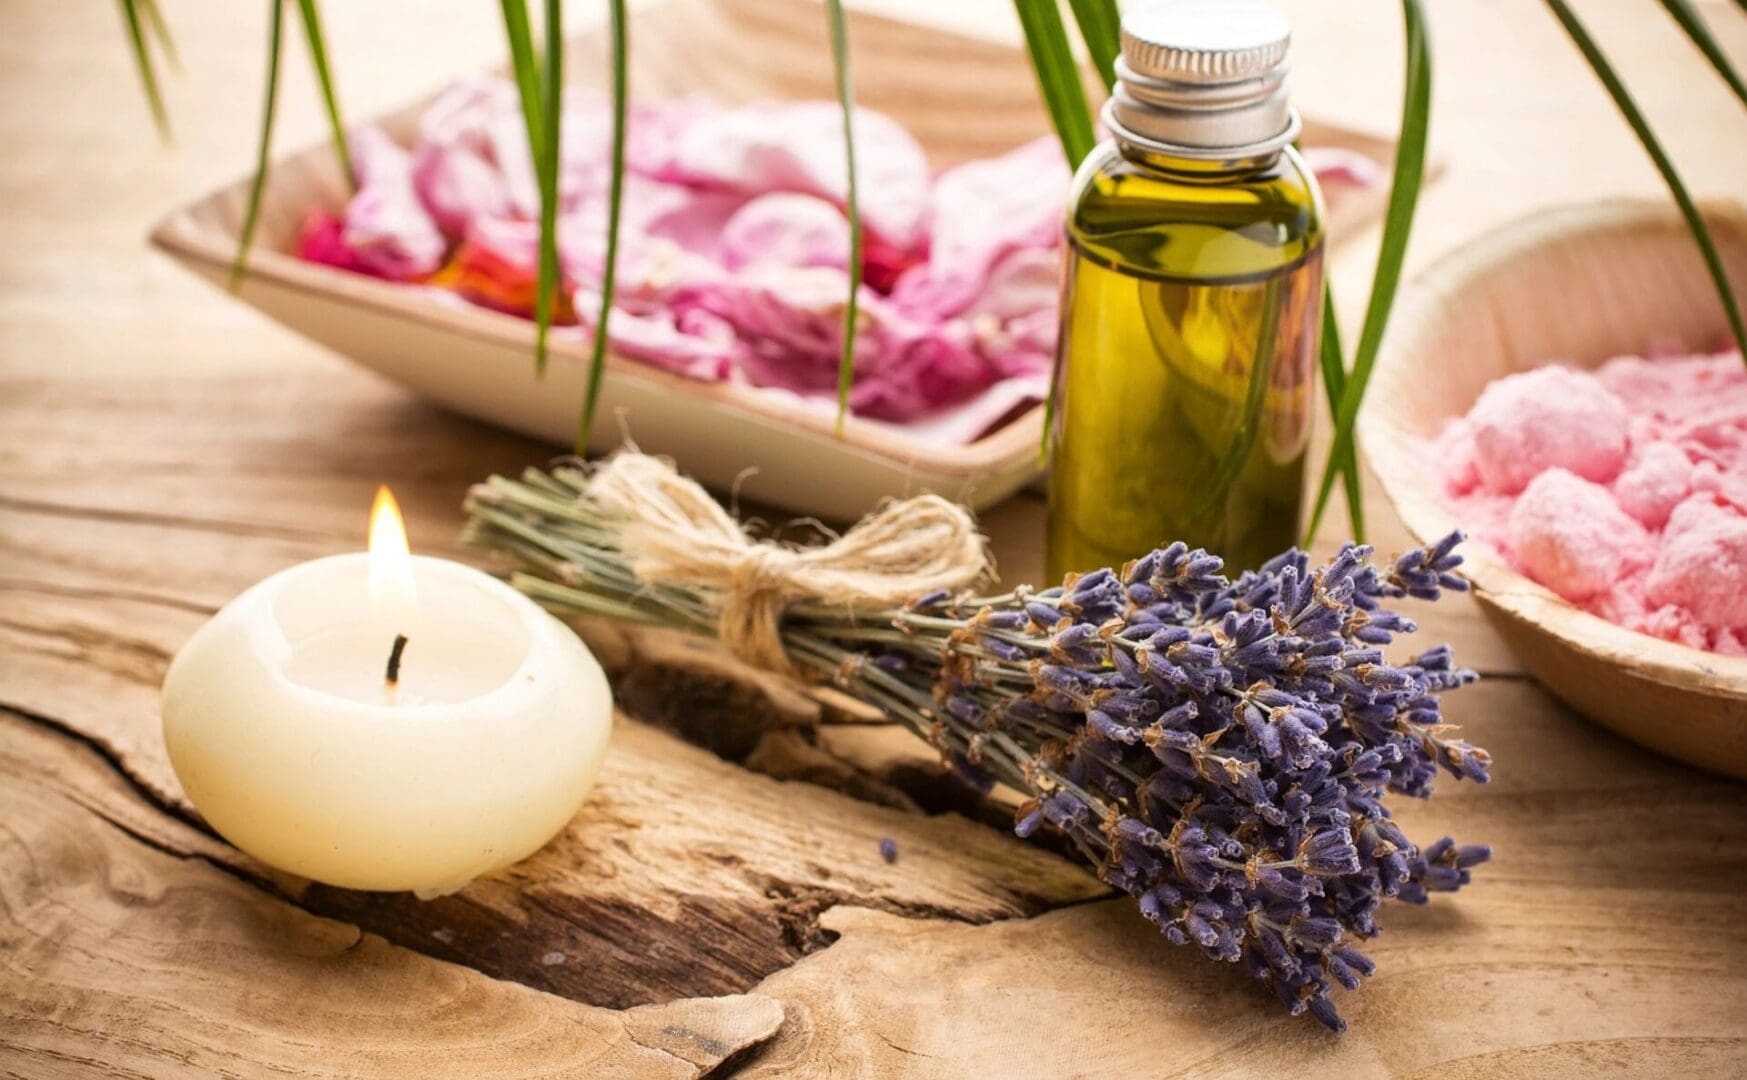 Lavender essential oil and a candle on a wooden table.